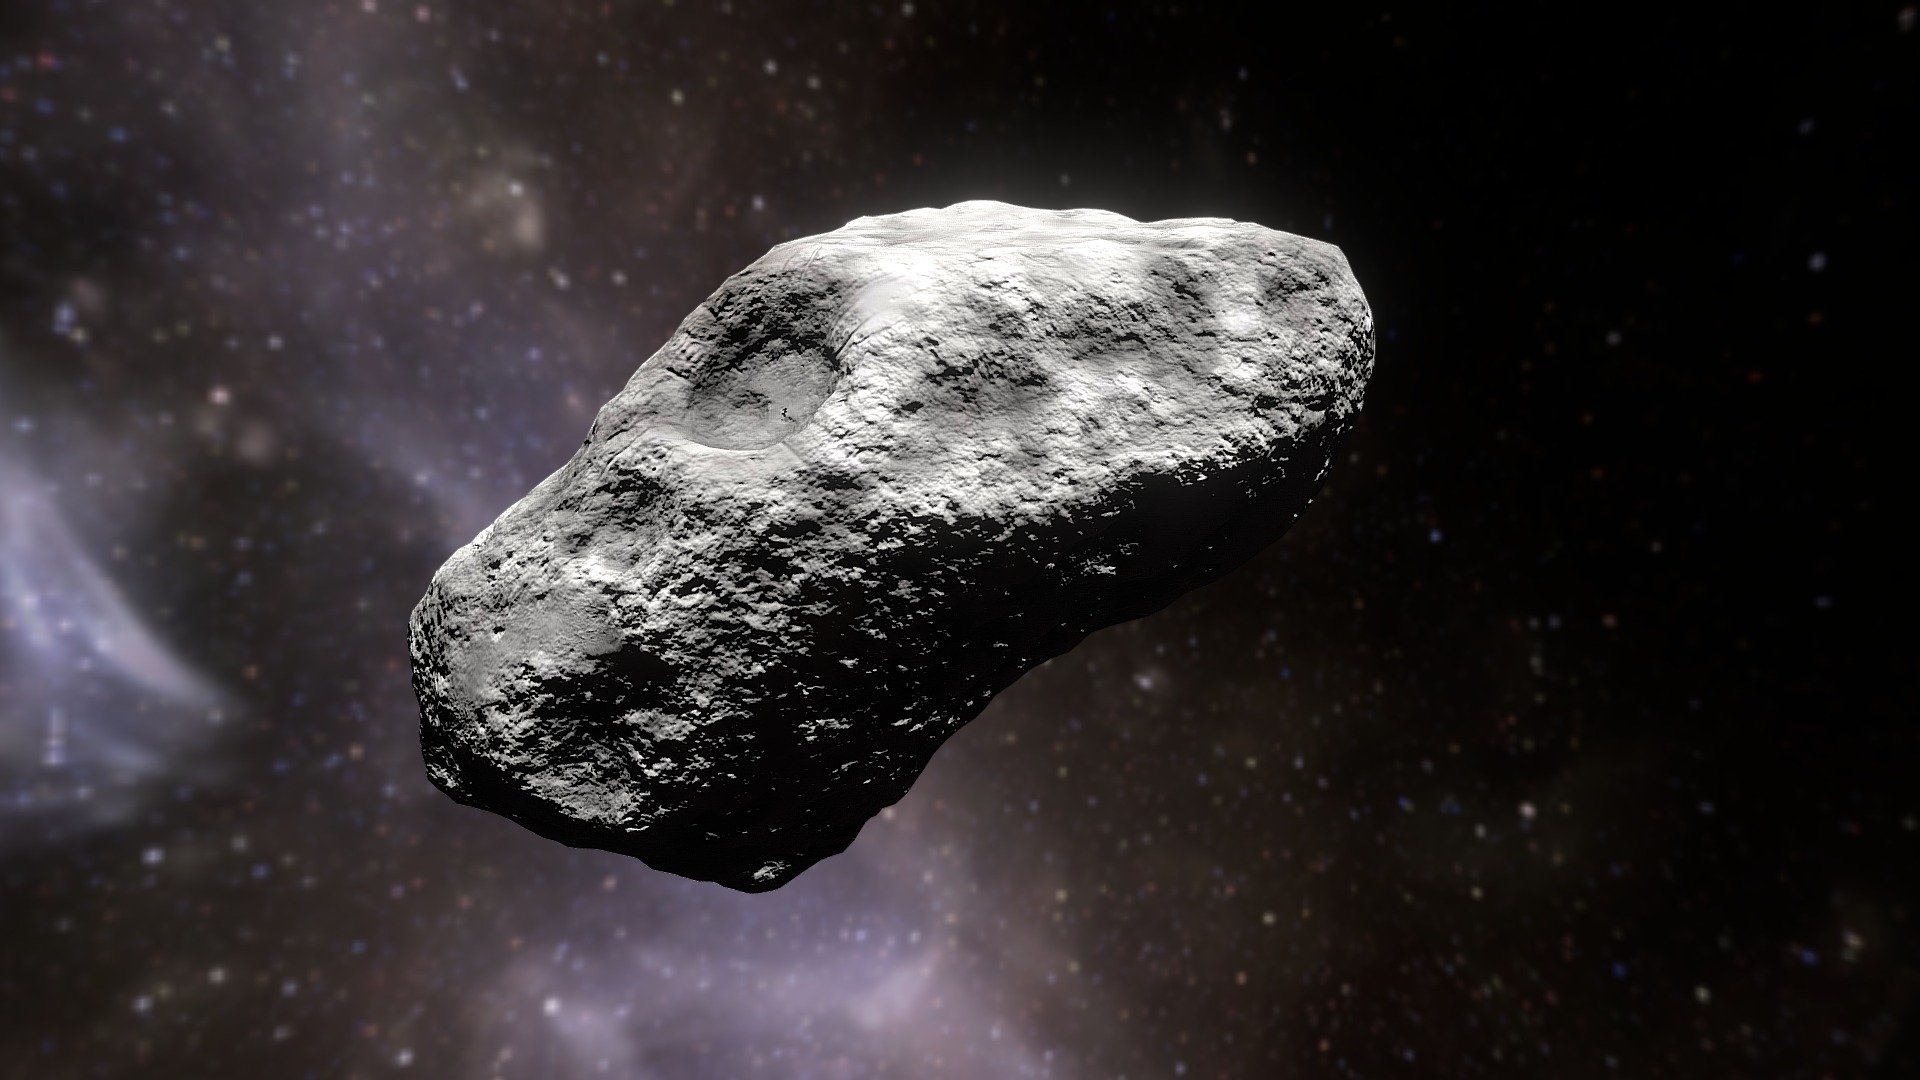 Giant piece of space rock. Buy here: -link removed- - Asteroid 1 - Buy Royalty Free 3D model by PeterMikielewicz 3d model